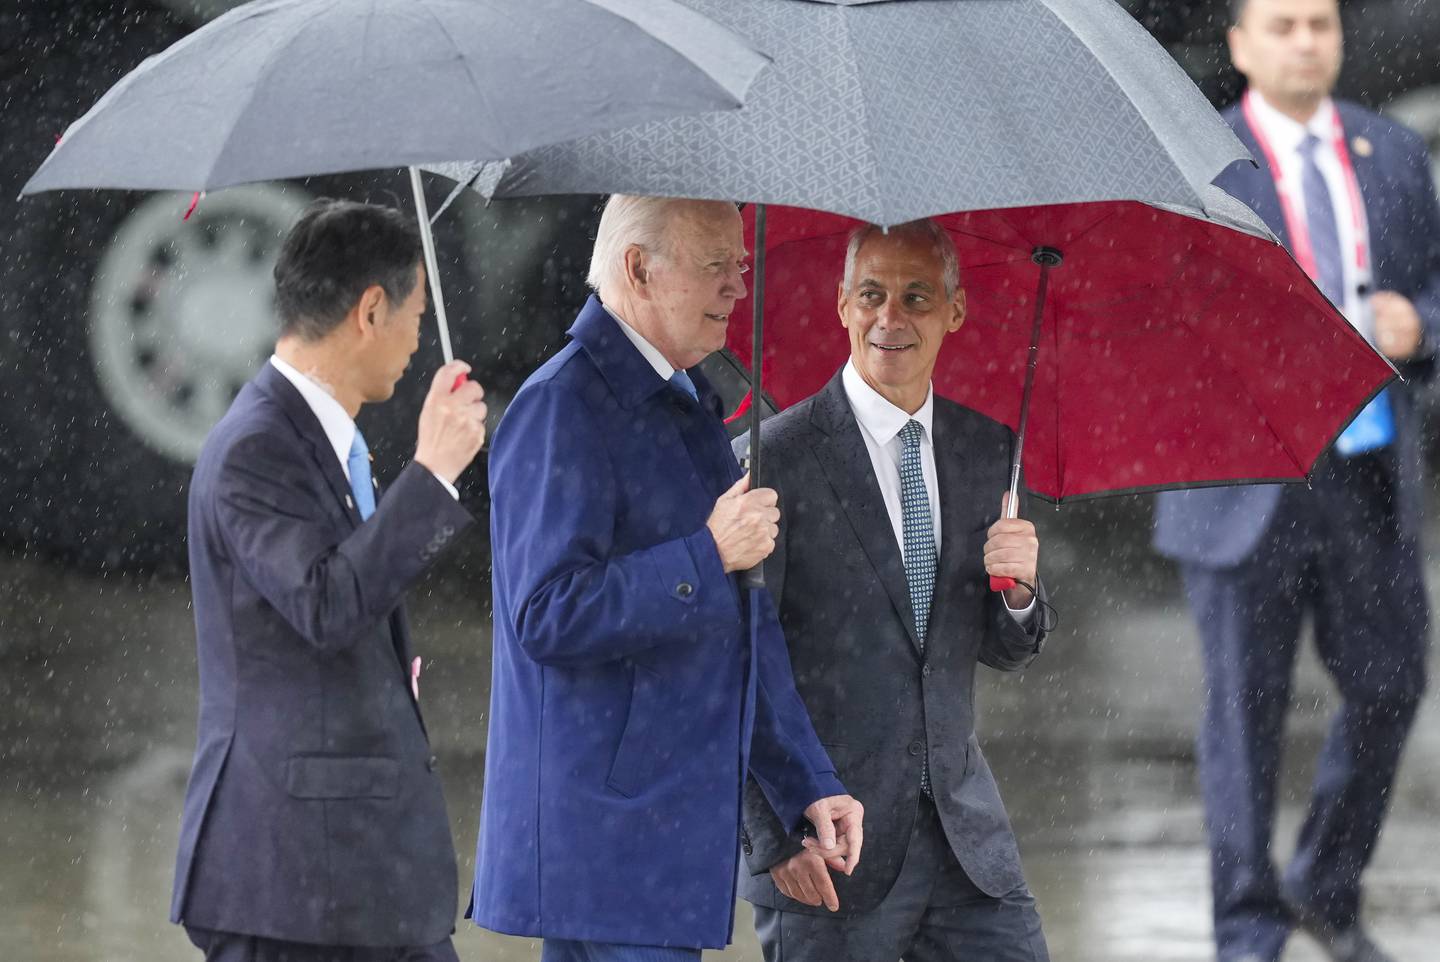 U.S. President Joe Biden, center, walks with Kenji Yamada, Japanese deputy minister of foreign affairs, left, and U.S. Ambassador to Japan Rahm Emanuel, right, after his arrival at Marine Corps Air Station Iwakuni, western Japan, Thursday, May 18, 2023, en route to Hiroshima for the Group of Seven nations' summit that starts Friday.